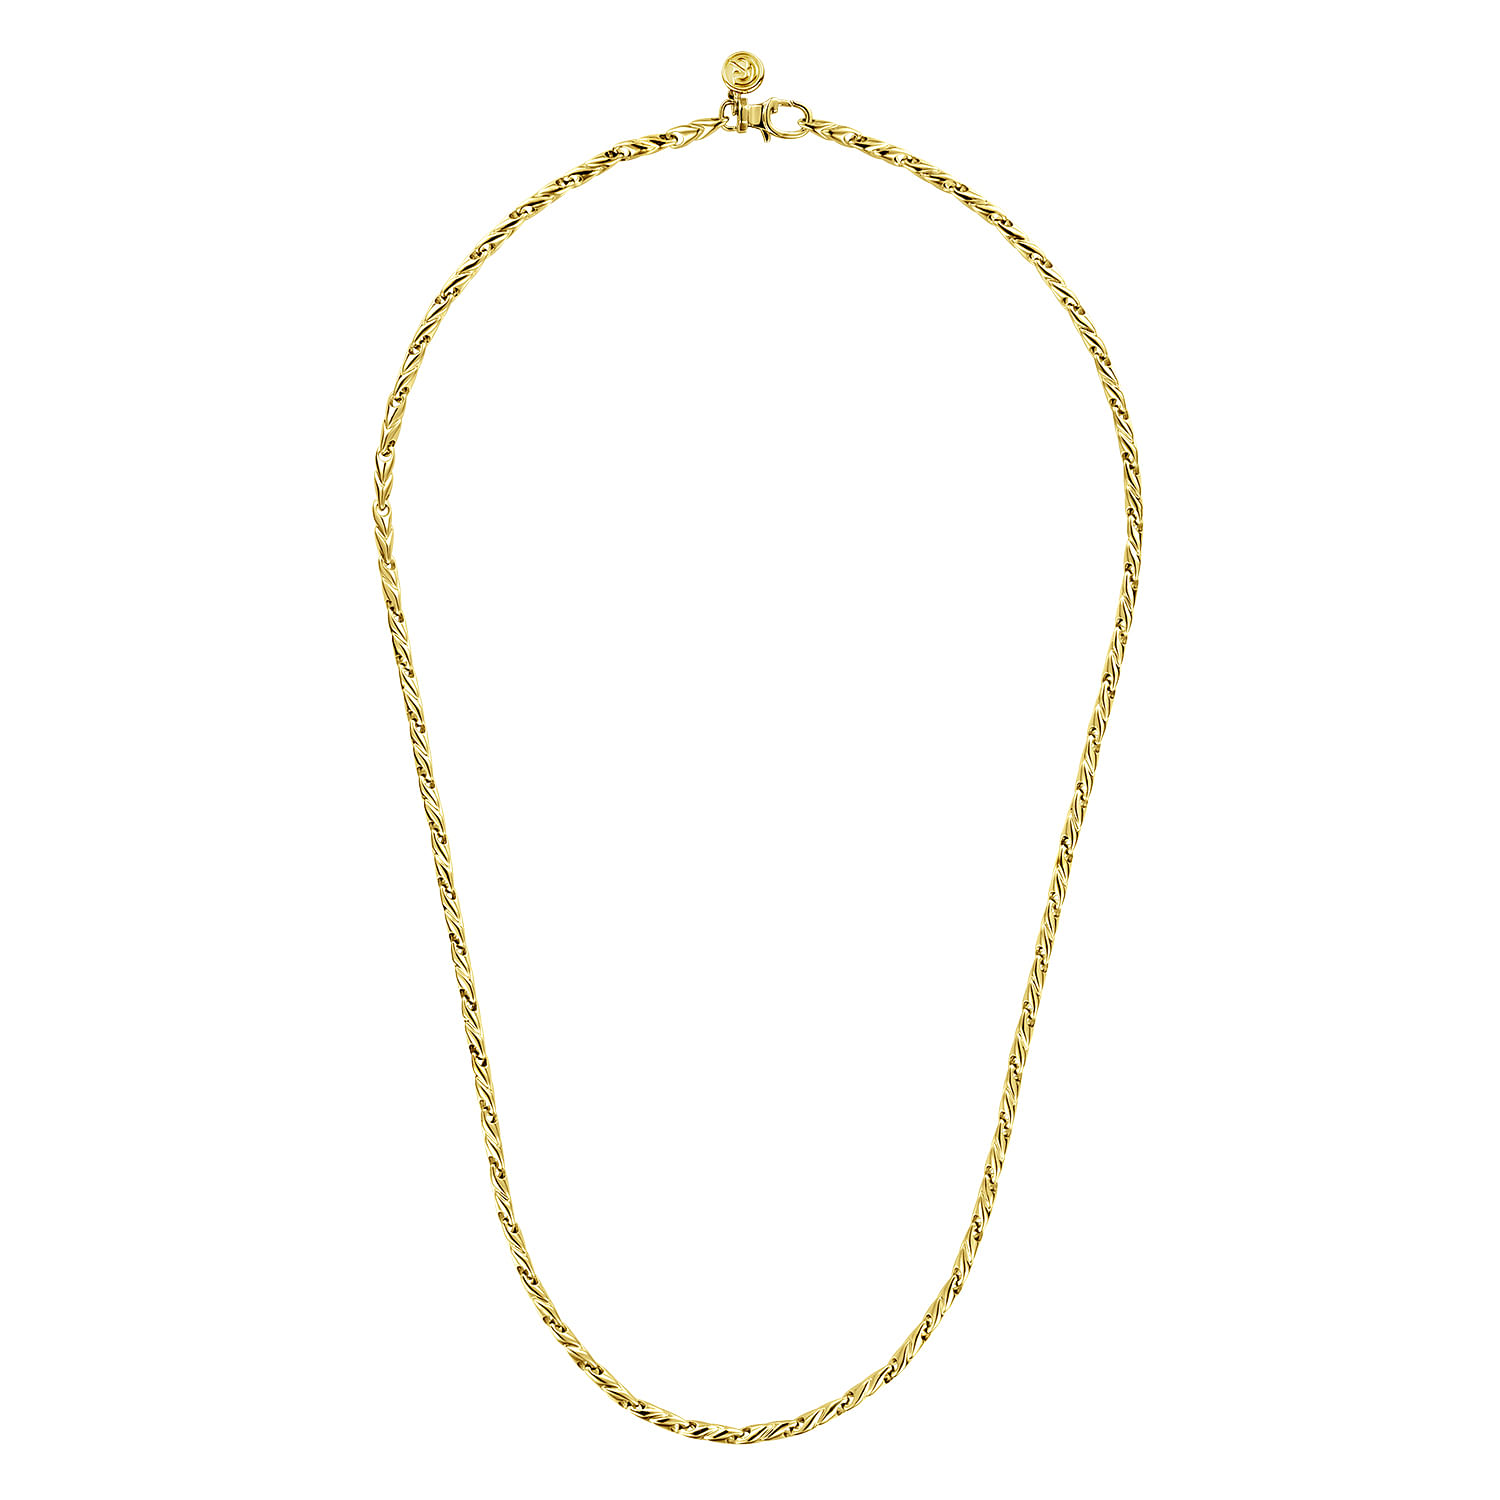 20 Inch 14K Yellow Gold Men's Chain Necklace - Shot 2